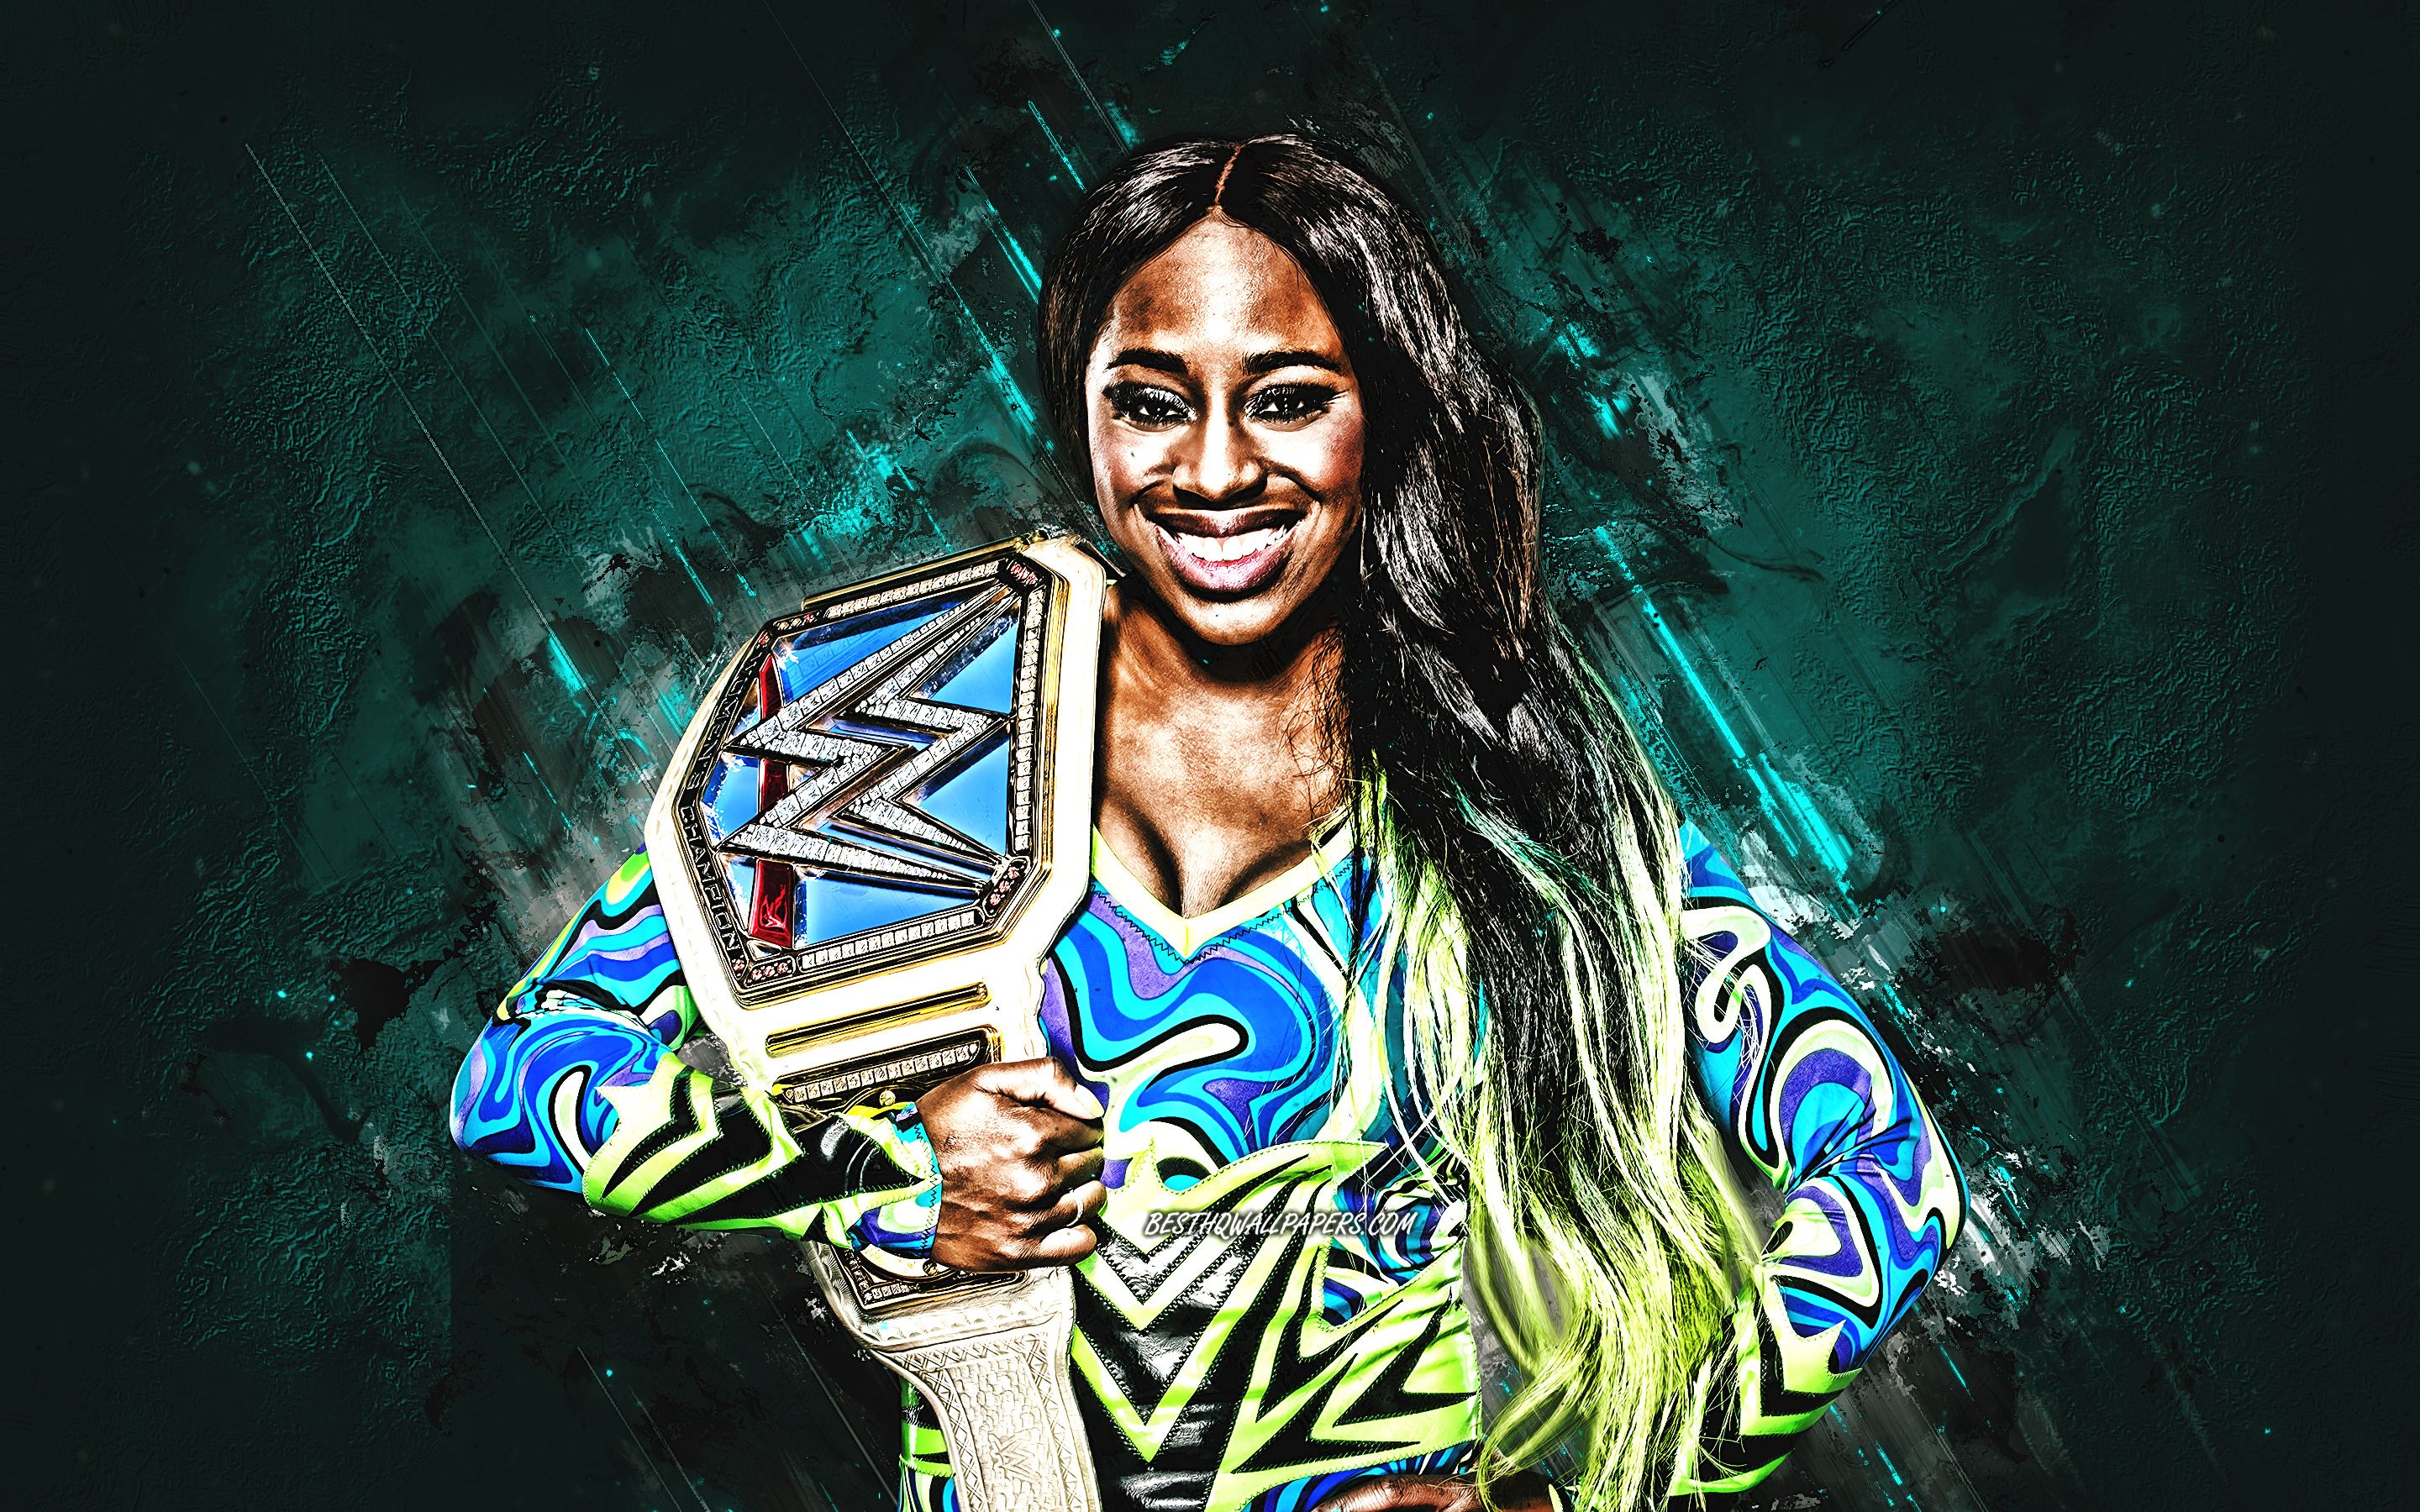 Download wallpaper Naomi, American wrestler, portrait, blue background, WWE, Trinity McCray, creative art, USA for desktop with resolution 2880x1800. High Quality HD picture wallpaper